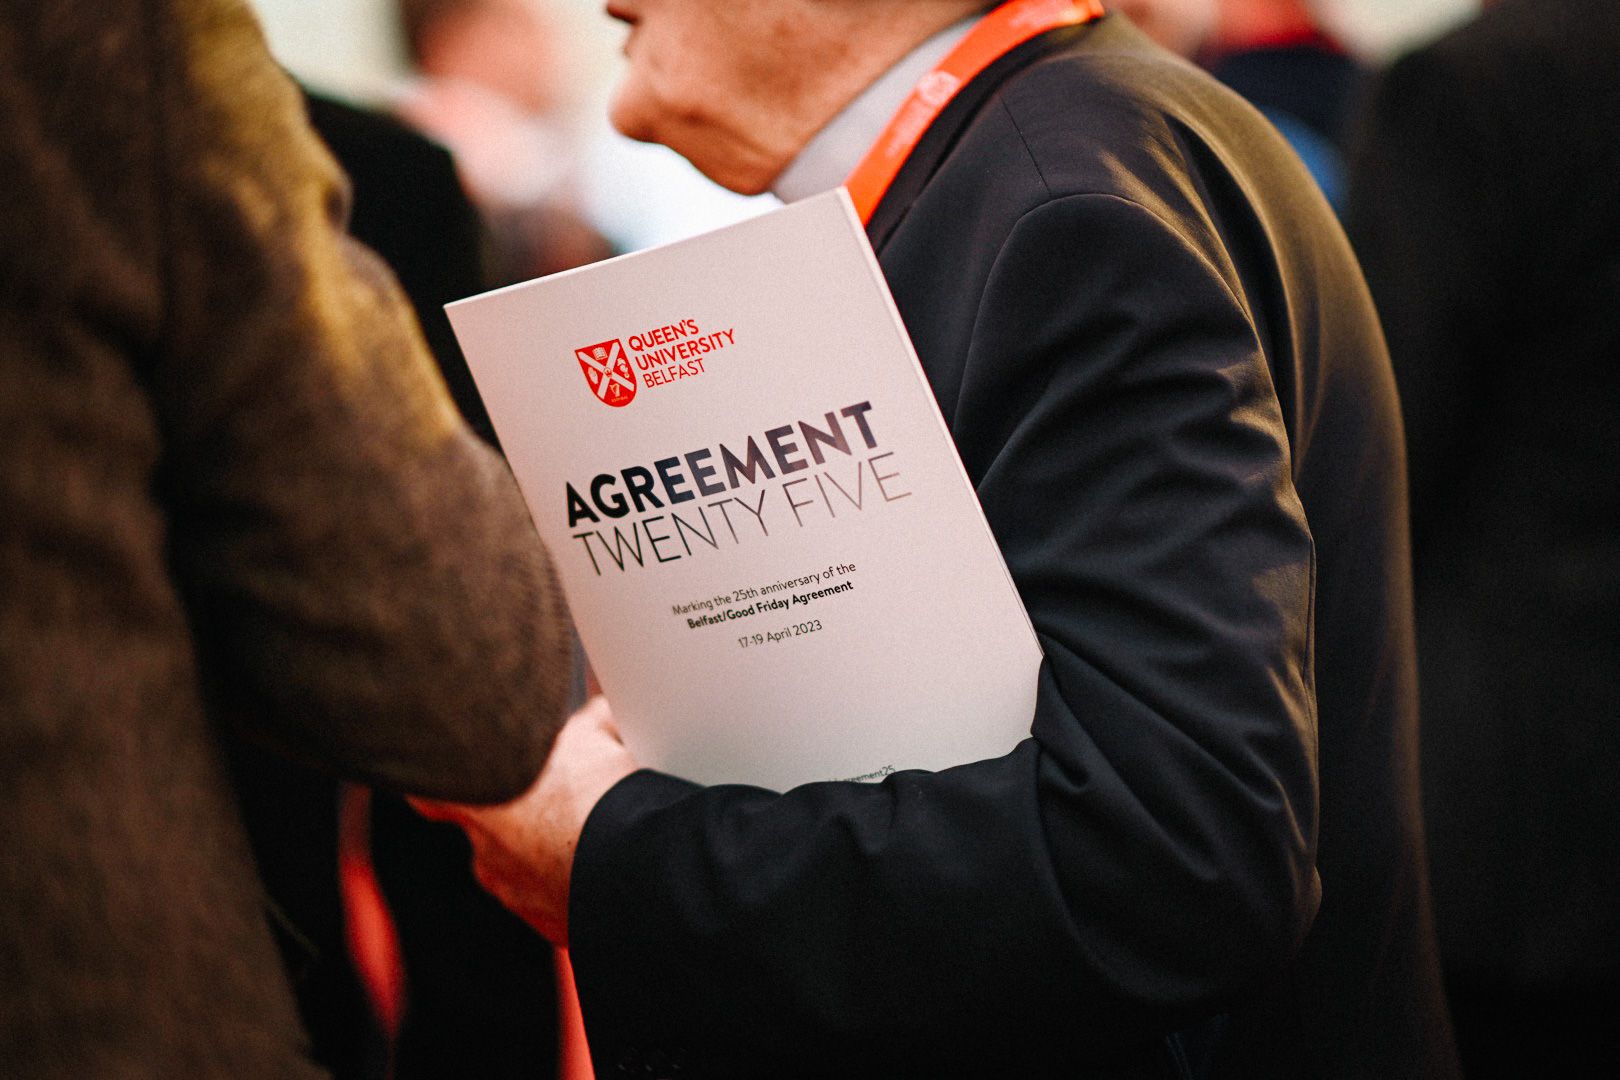 An attendee carries the conference programme